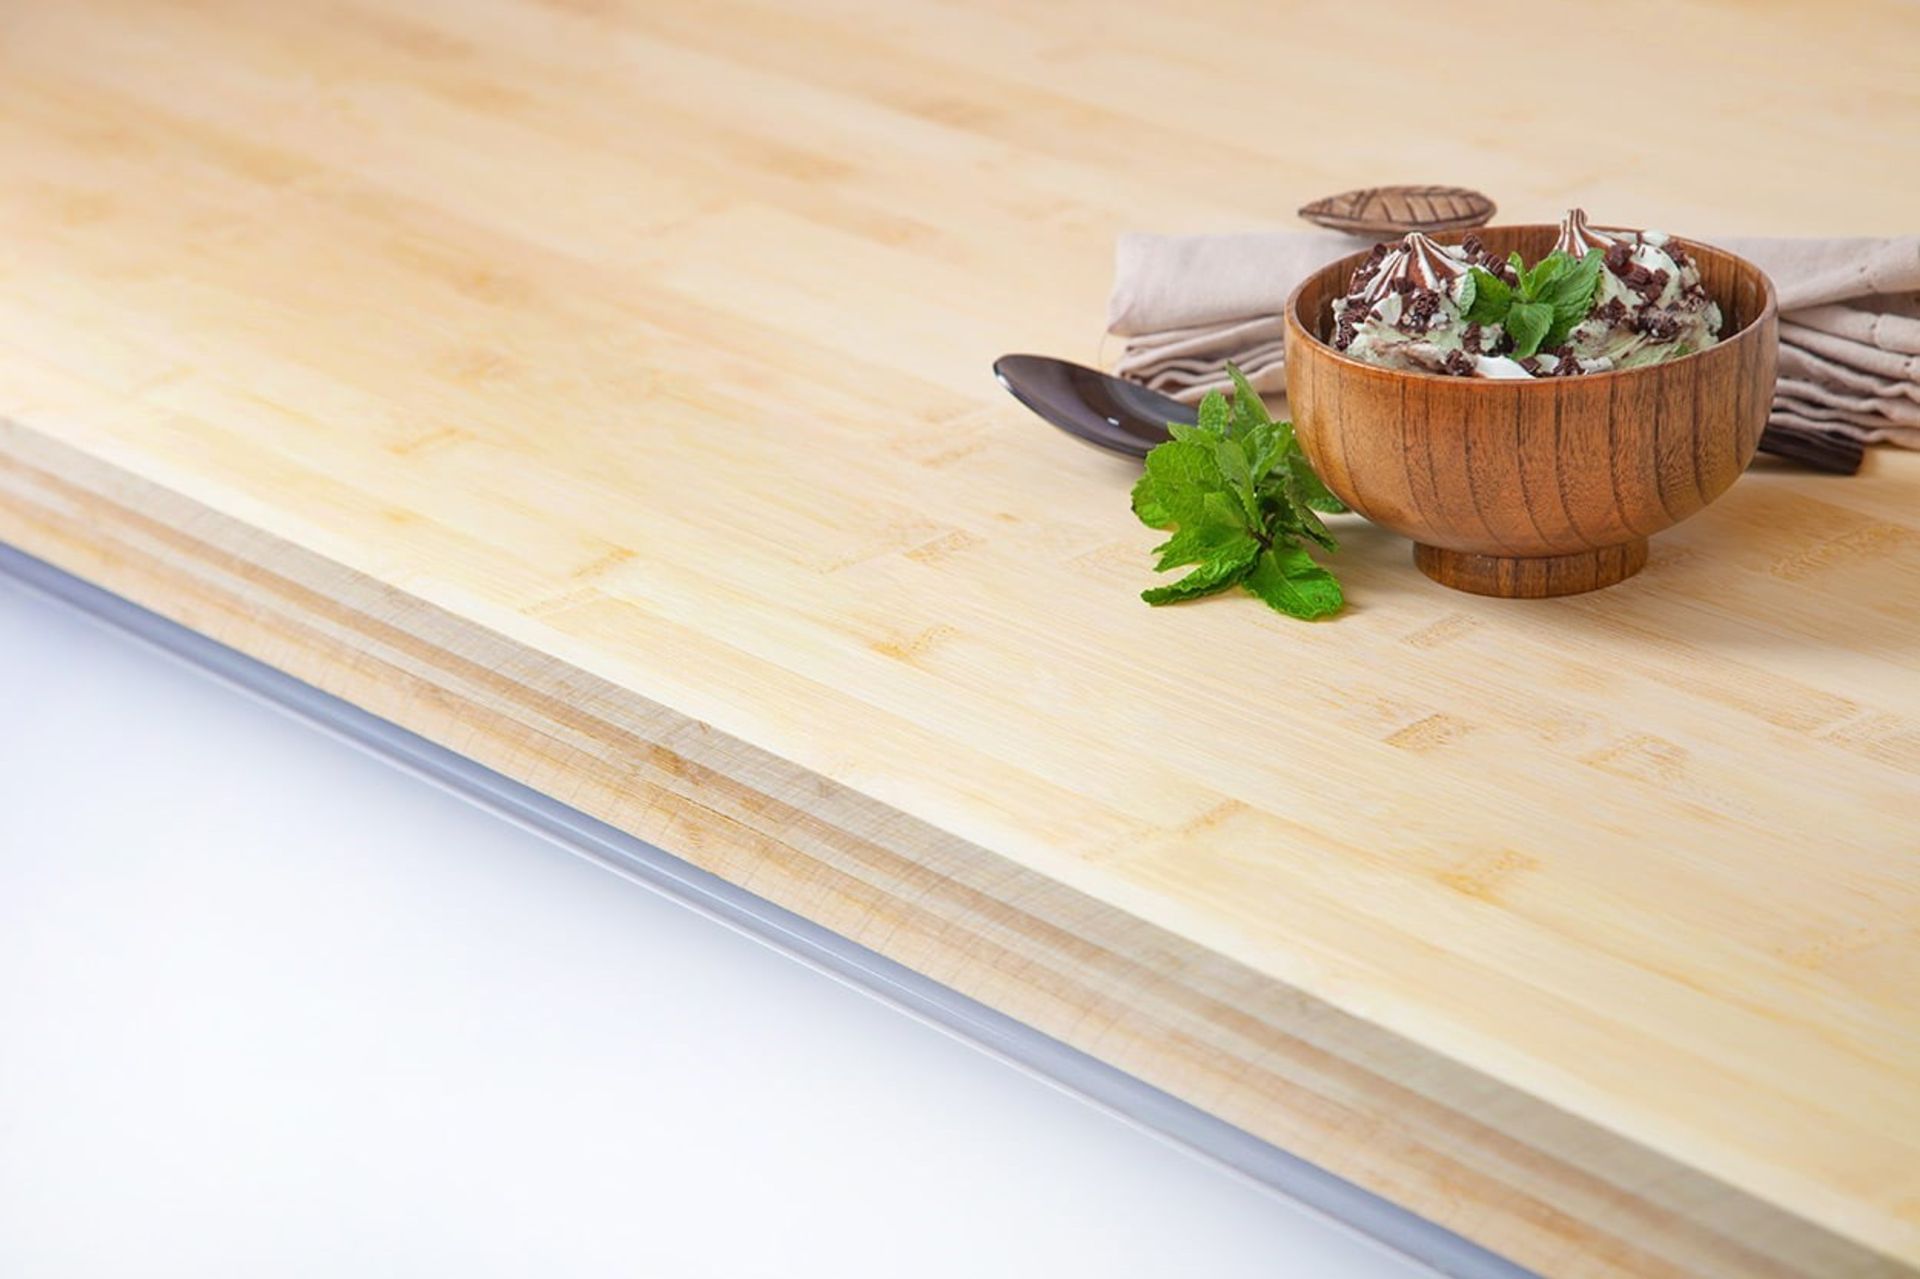 1 x Layered Solid Bamboo Wood Worktop - Size: 3000 x 650 x 40mm - Ideal For Kitchens, Countertops, - Image 3 of 4